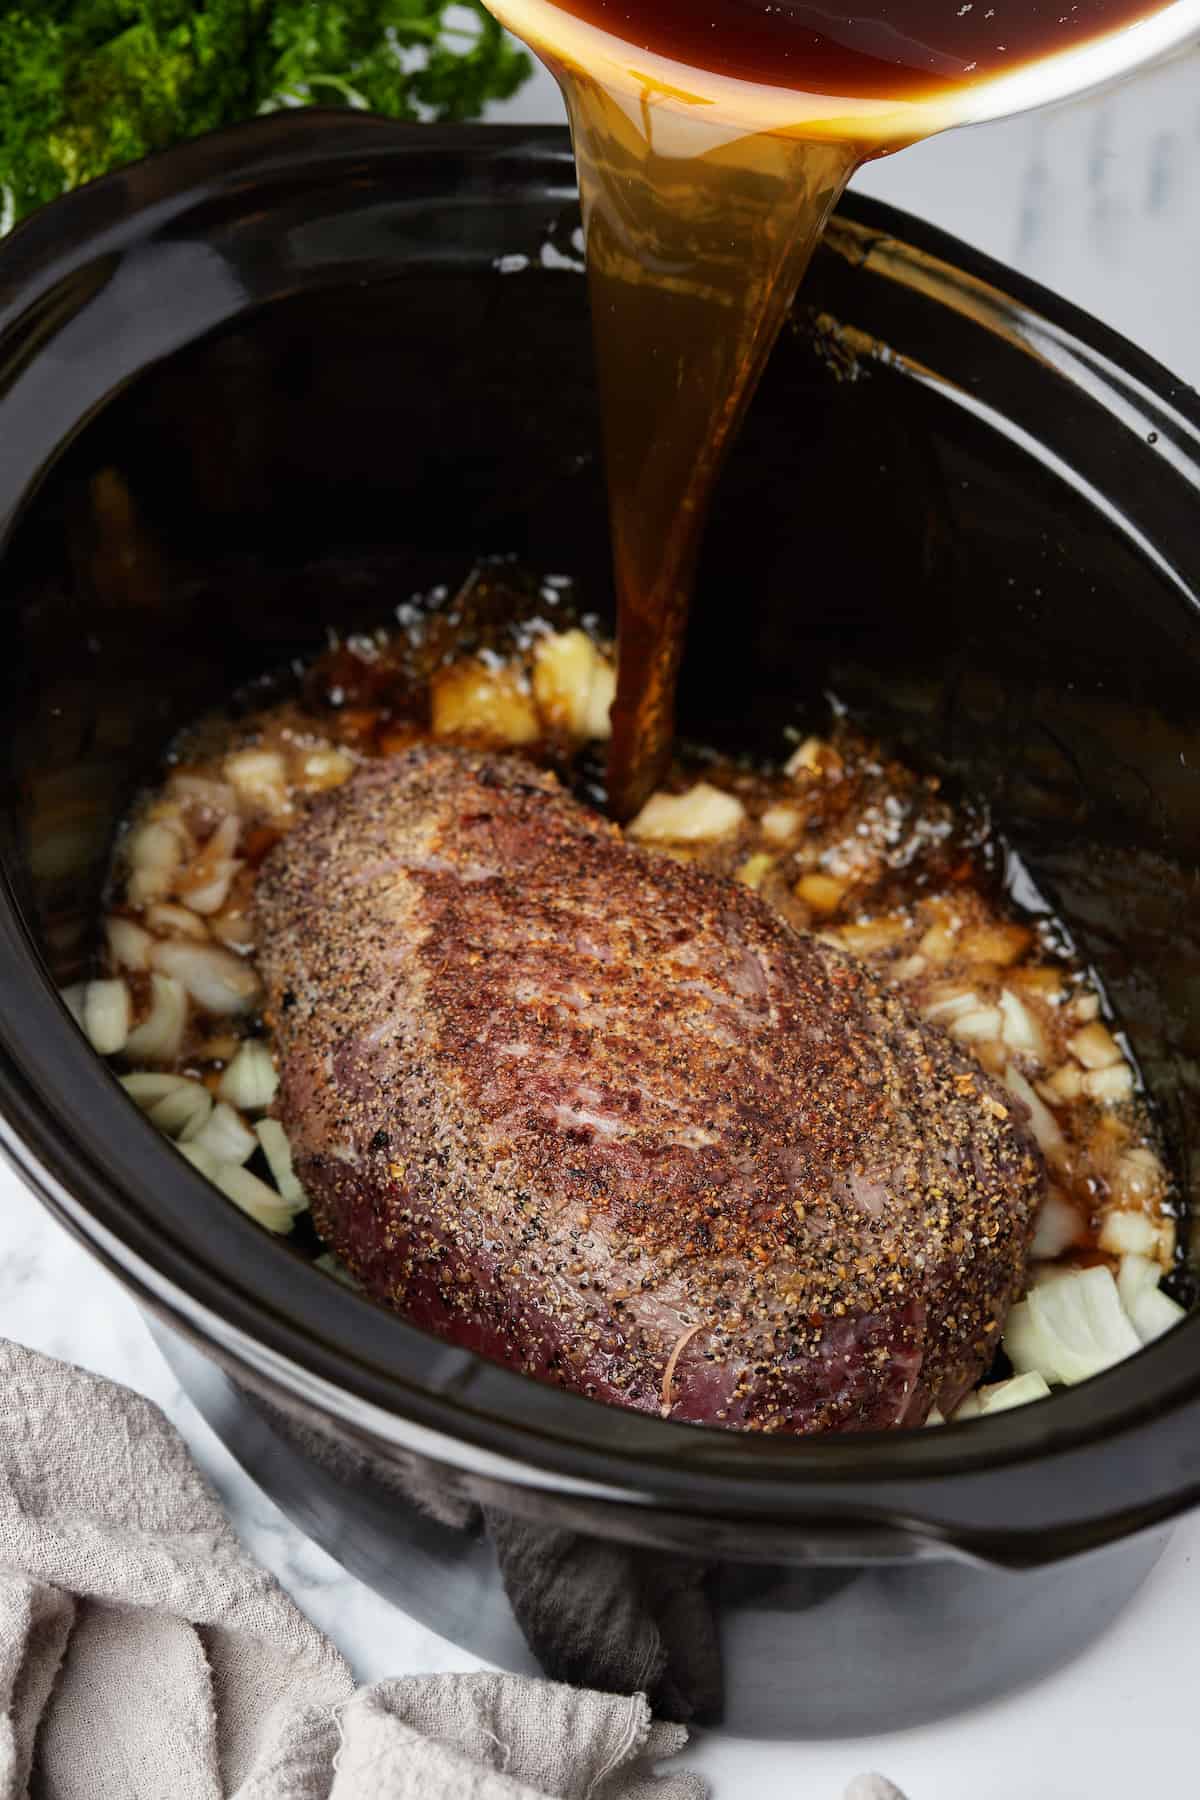 Beef broth being poured into a slow cooker filled with onions, garlic and beef